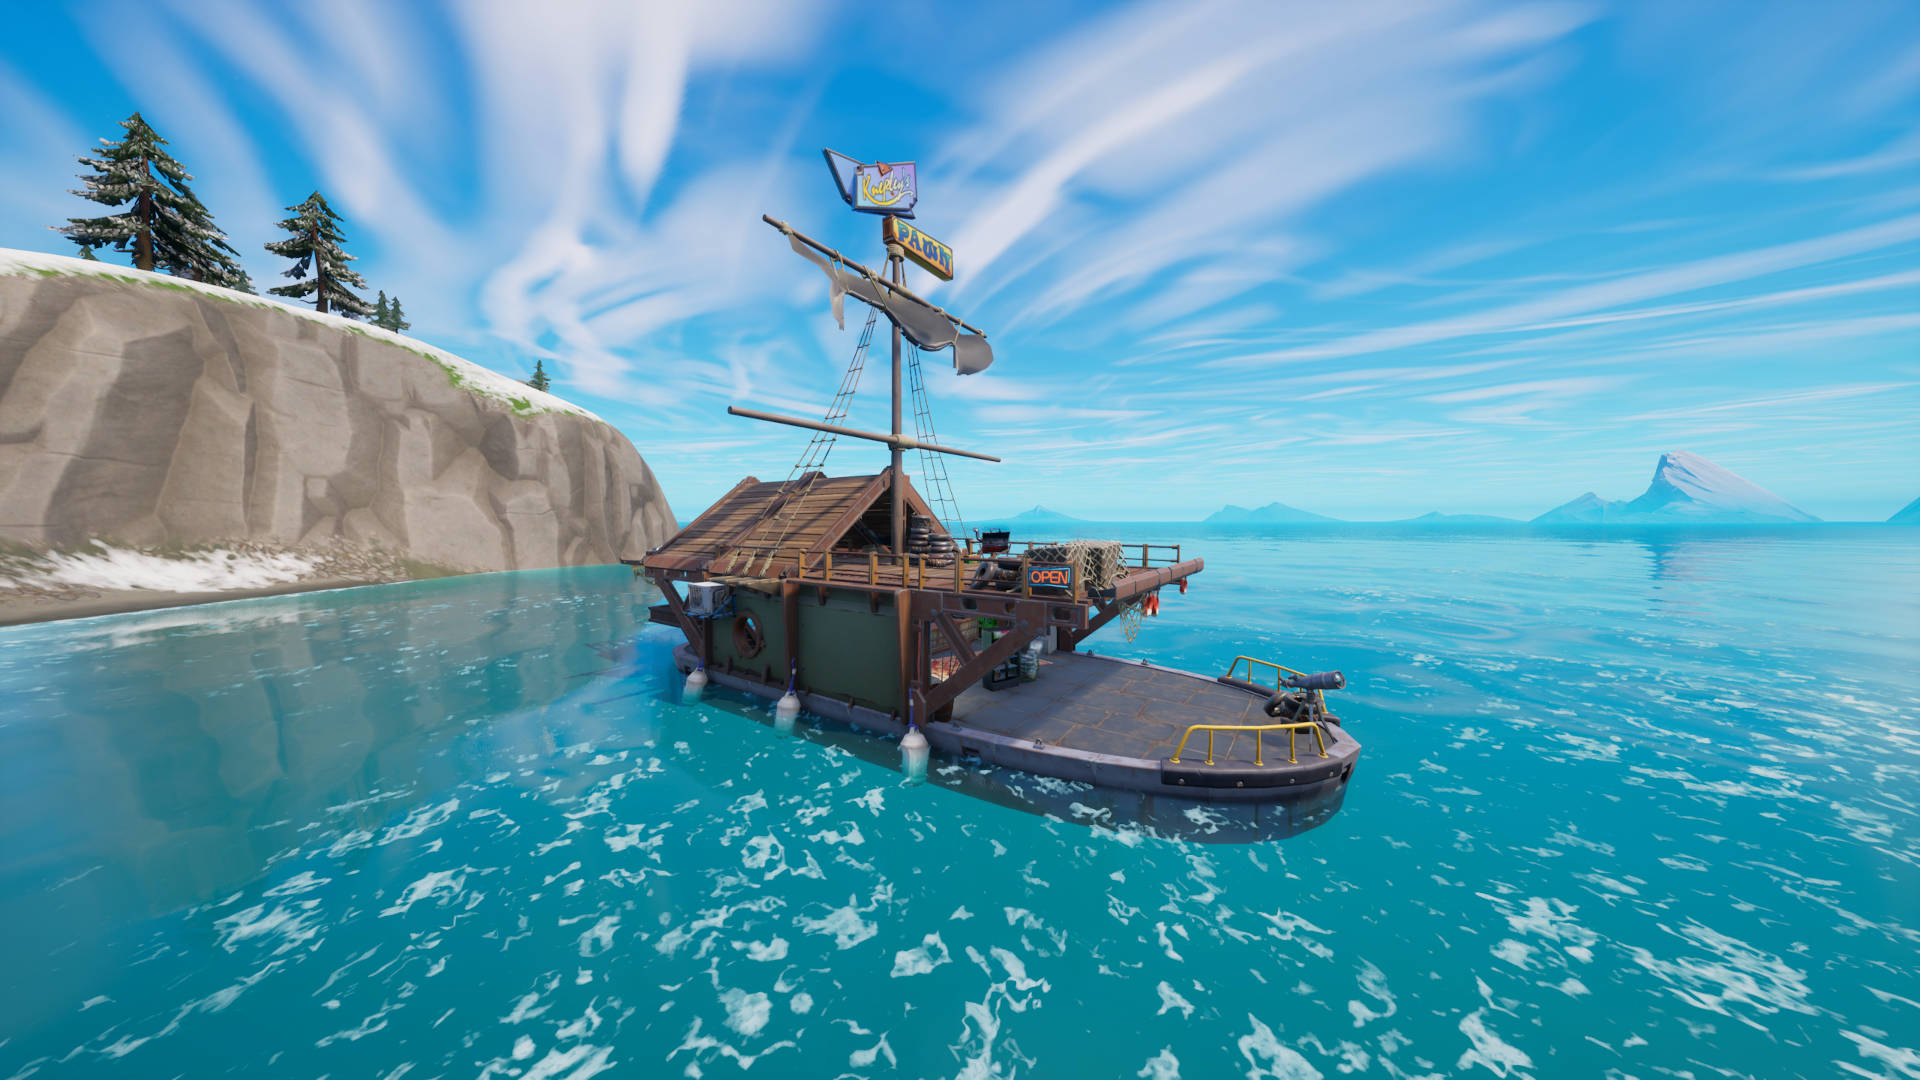 How to visit Adrift or Pawntoon in a motorboat in Fortnite